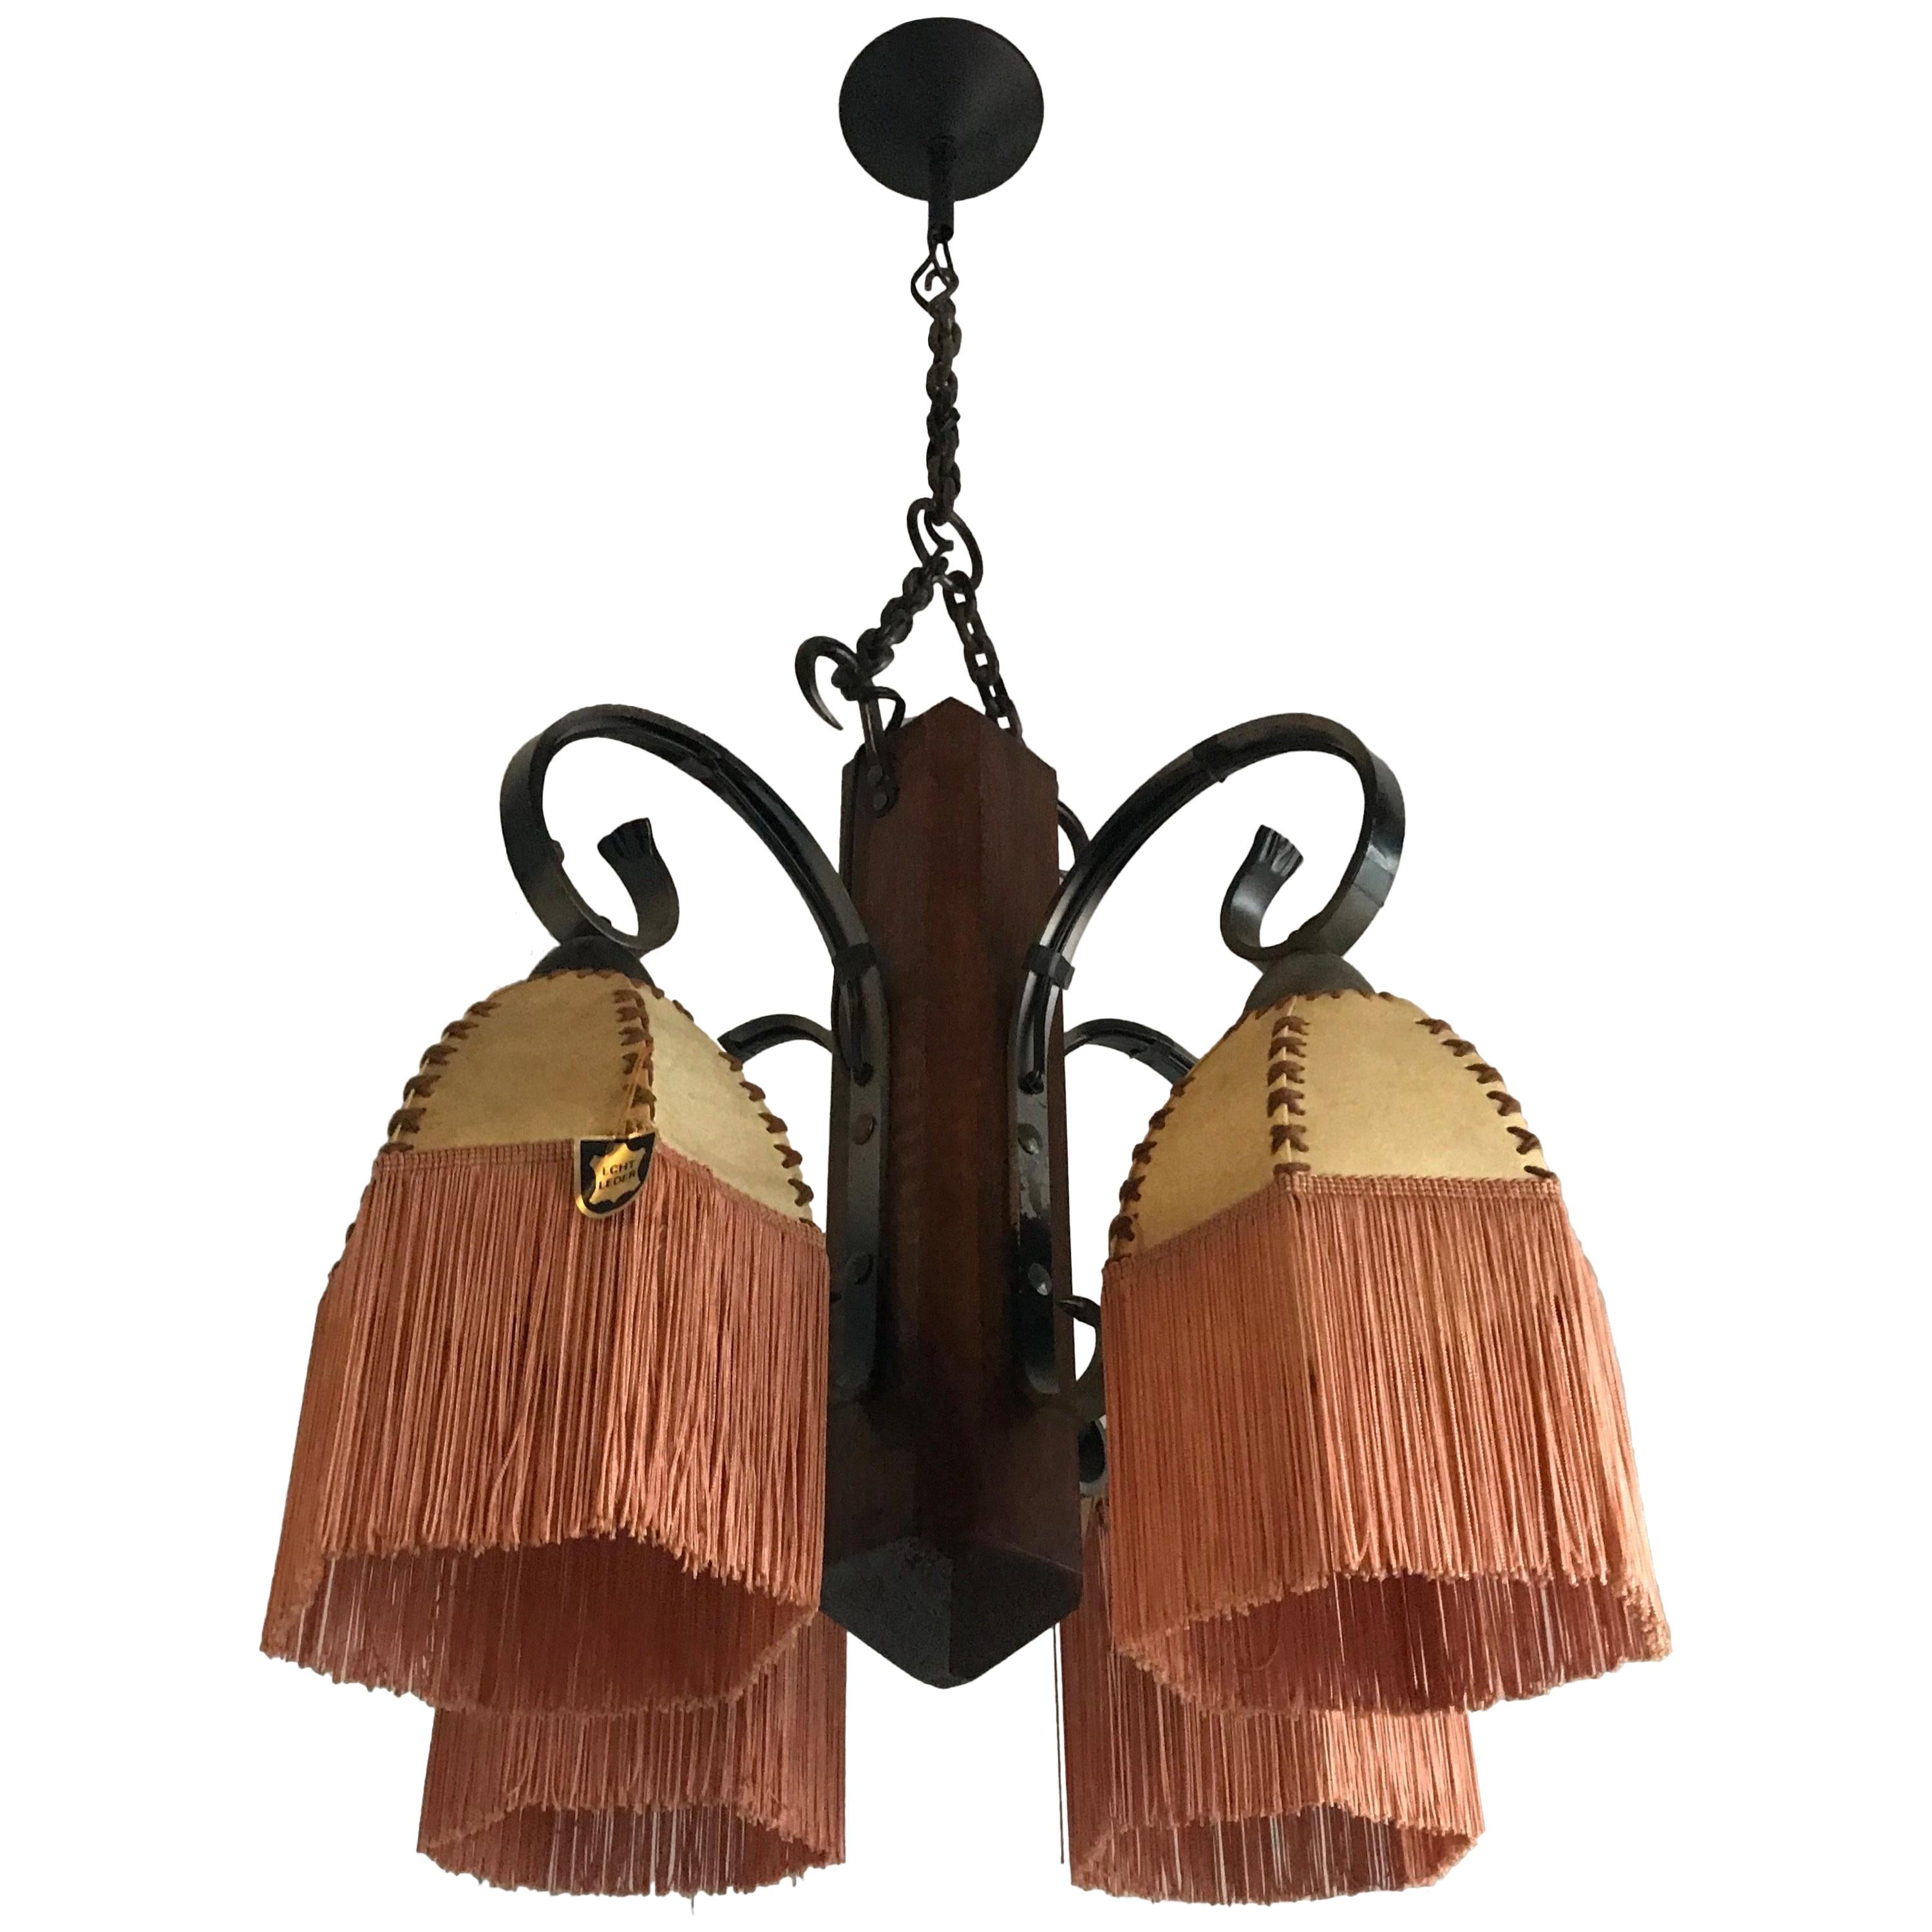 Rare Wrought Iron and Wood Pendant Light Fixture with Leather Shades and Fringes